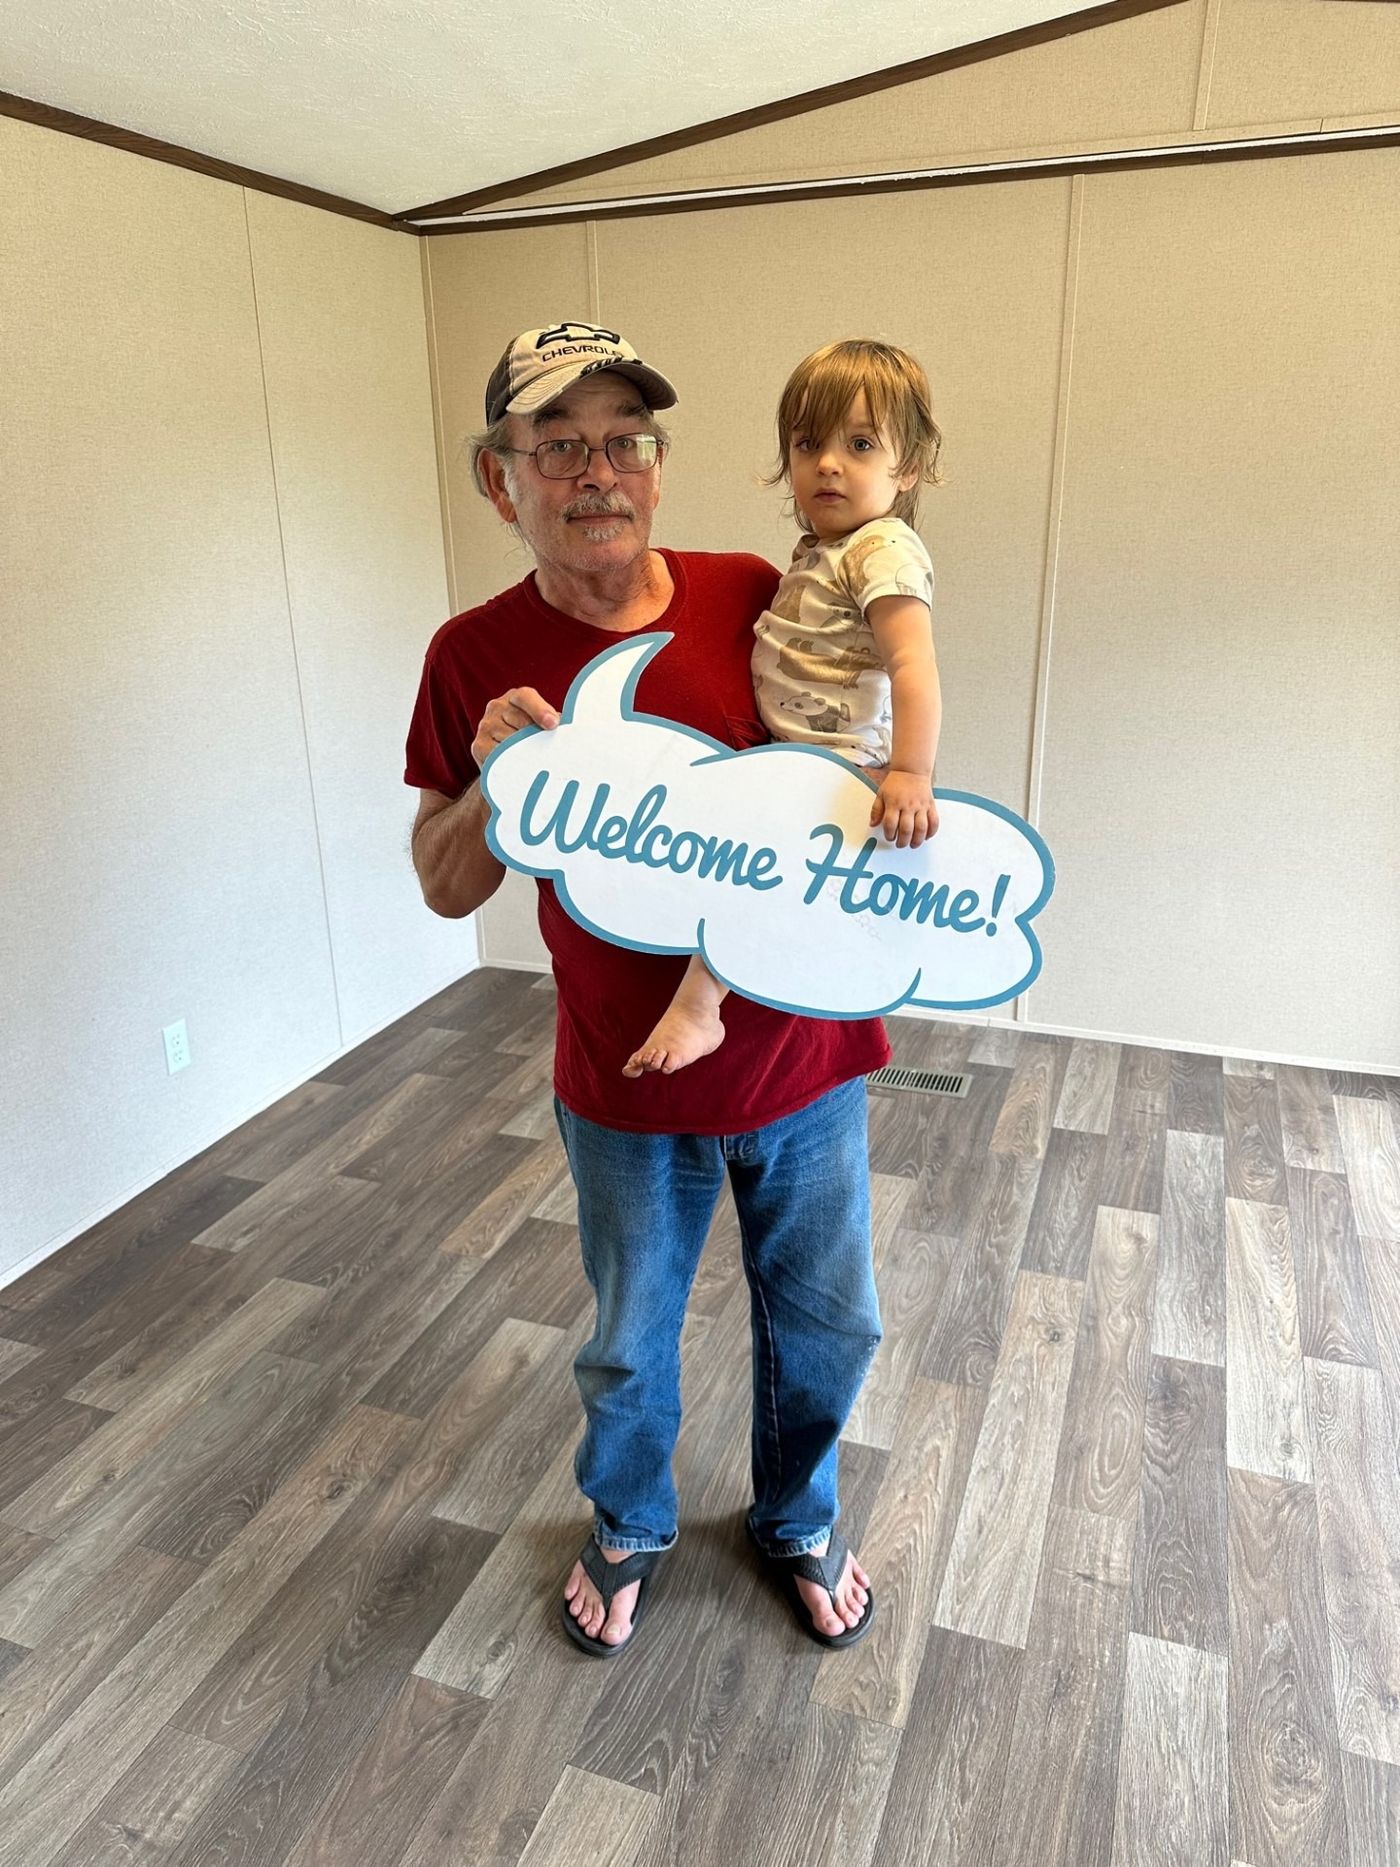 WILLIAM ANTHONY B. welcome home image